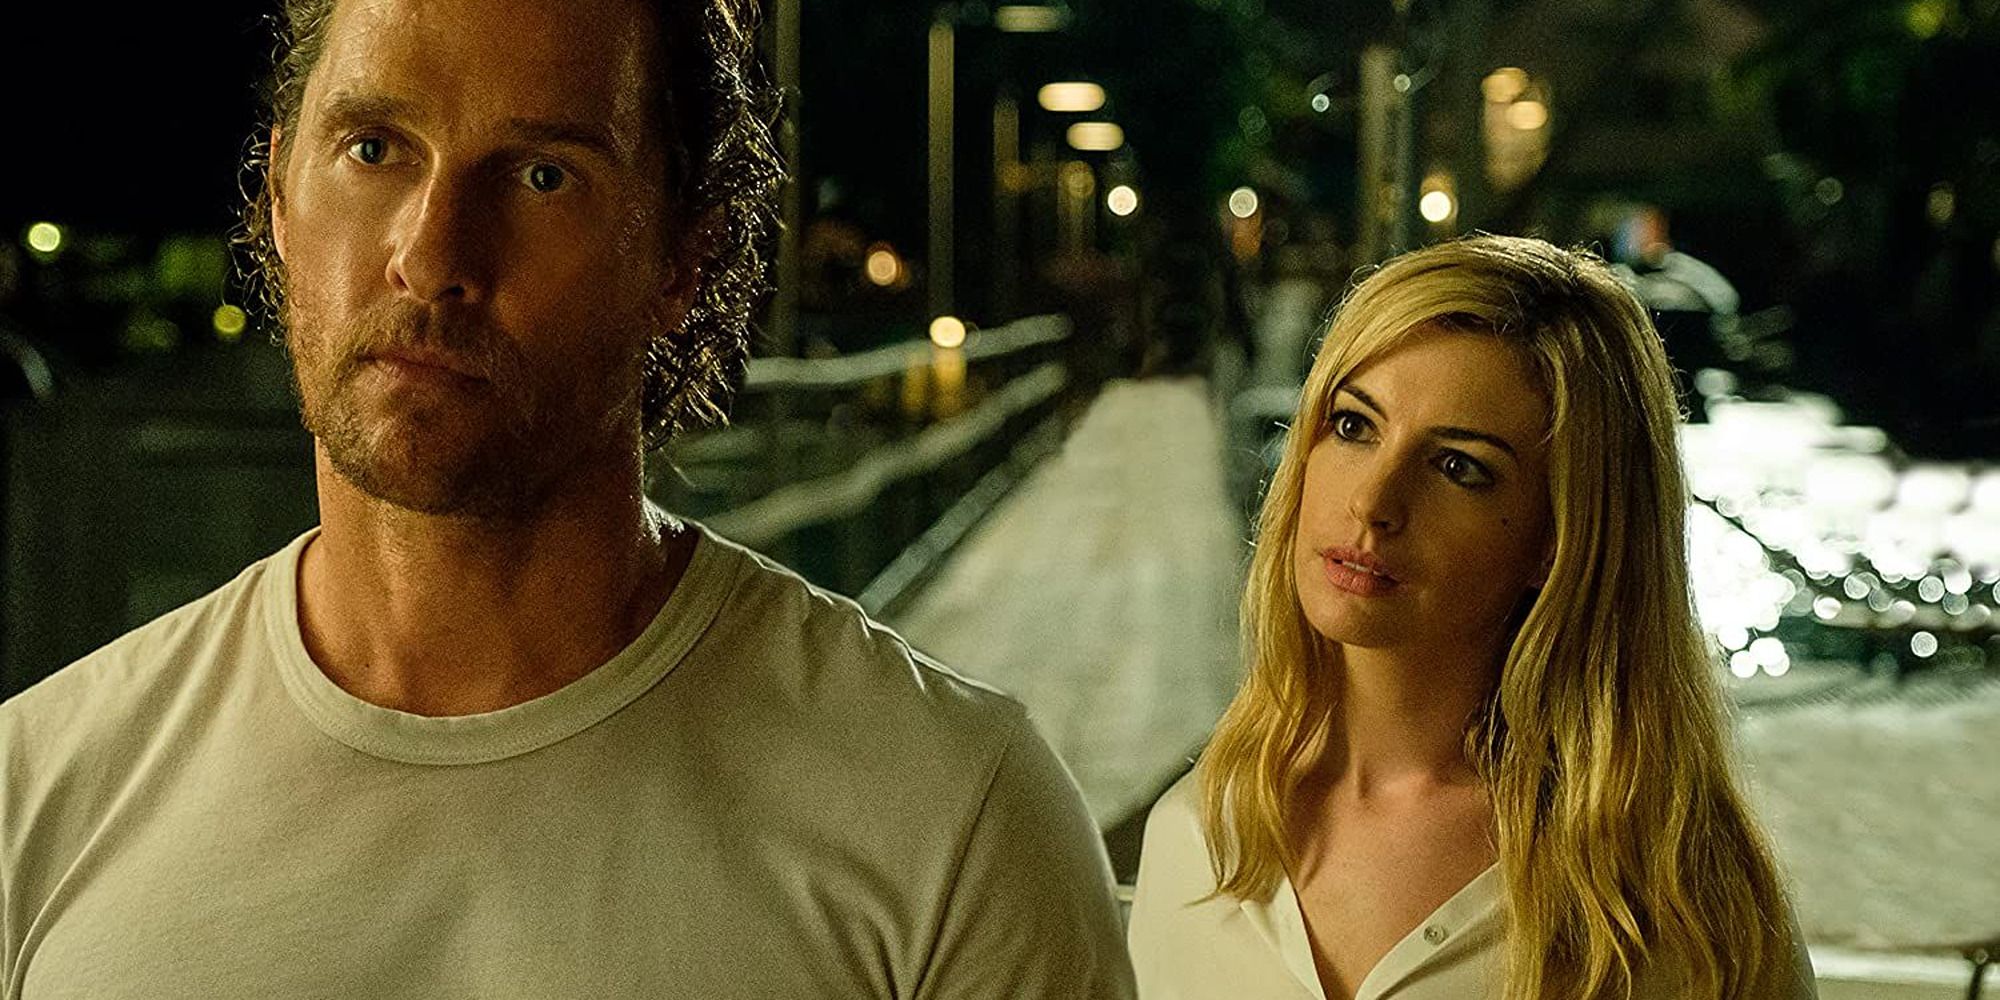 Anne Hathaway looking at Matthew McConaughey from behind in Serenity